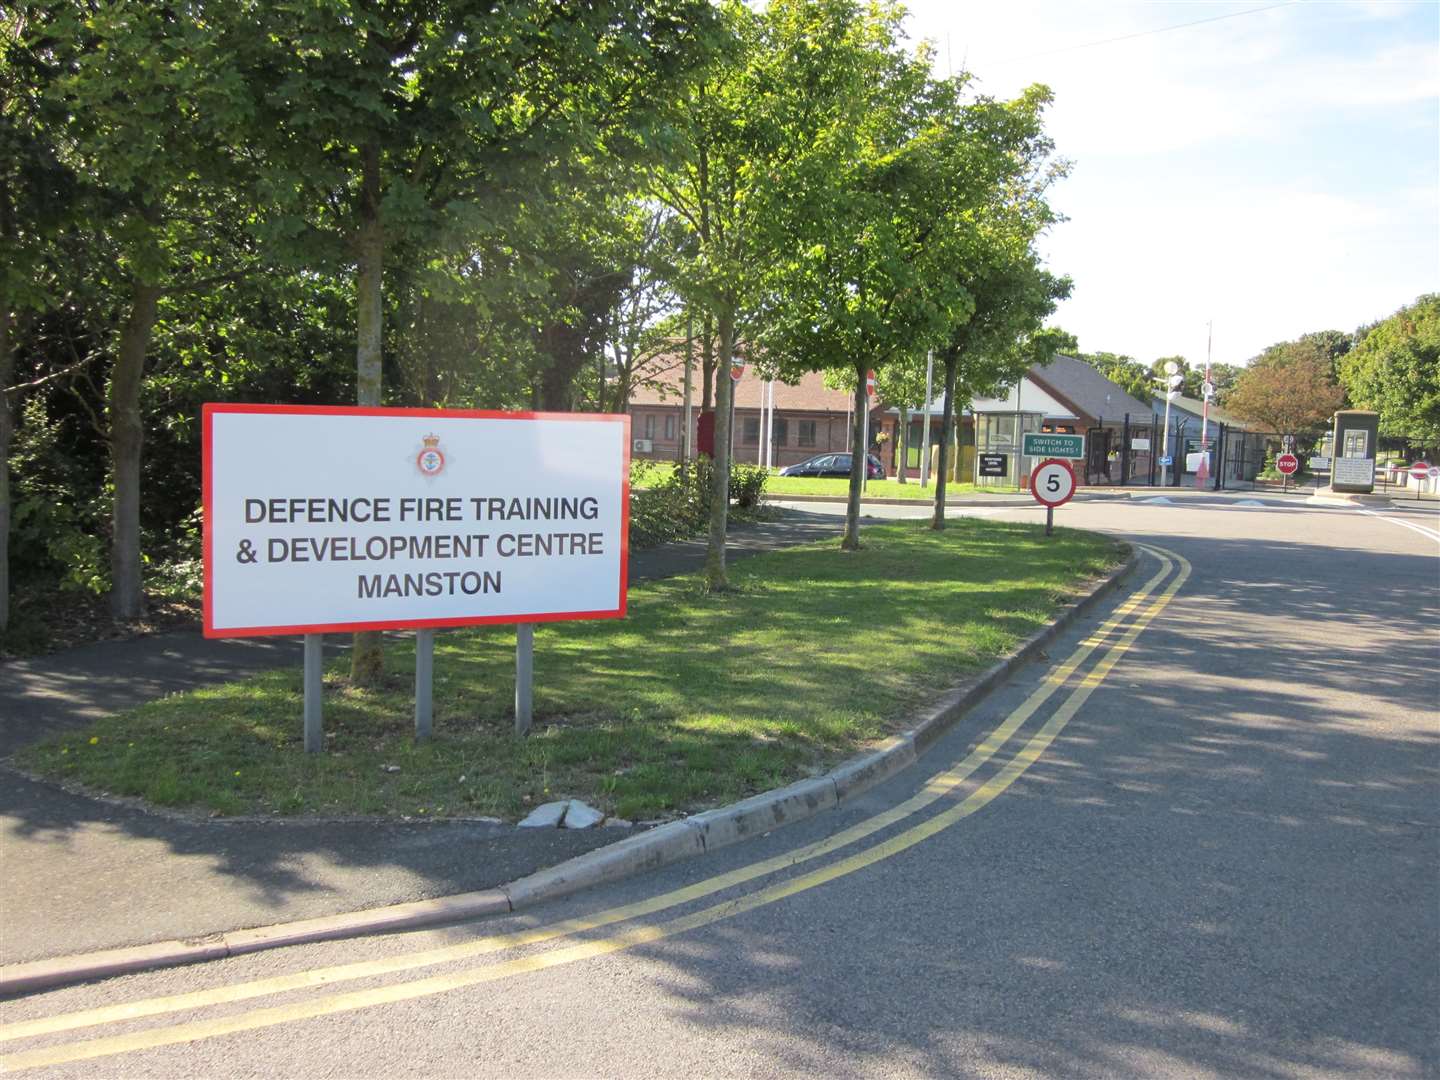 The former Defence Fire Training and Development Centre in Manston